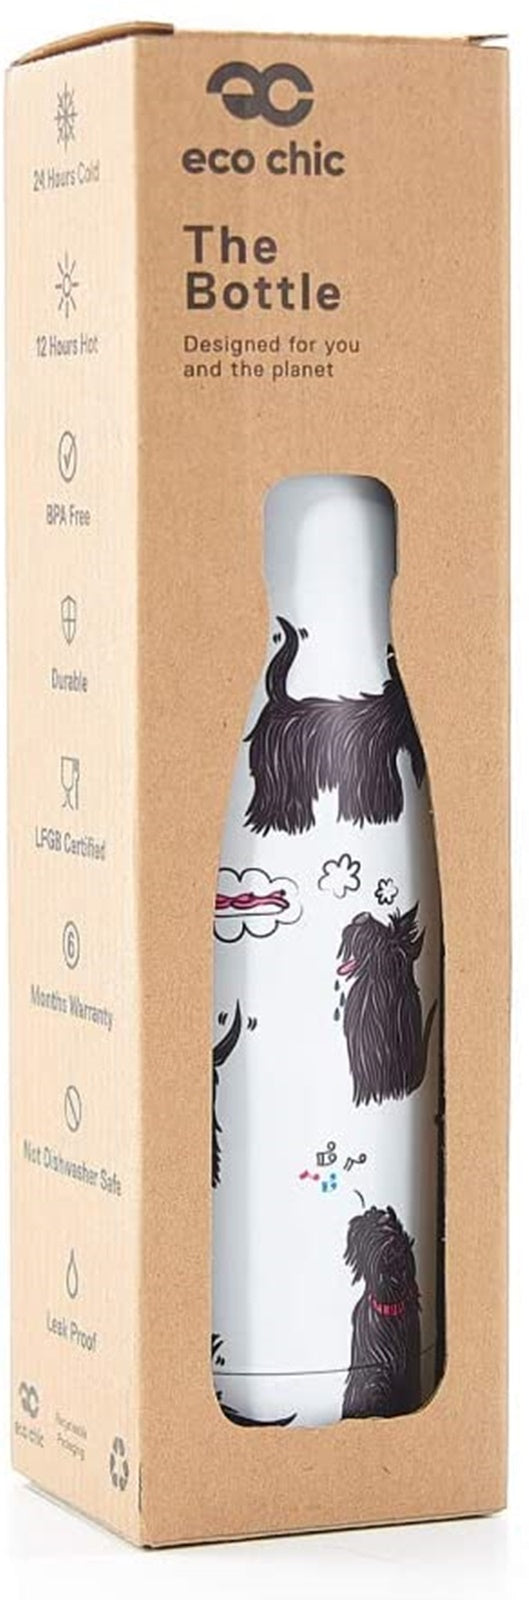 Eco Chic Reusable Thermal Bottle | Stainless Steel Insulated Travel Bottle with Leakproof Lid | Eco-Friendly and Reusable for Hot & Cold Drinks (White Scatty Scotty, 500ml/17oz)